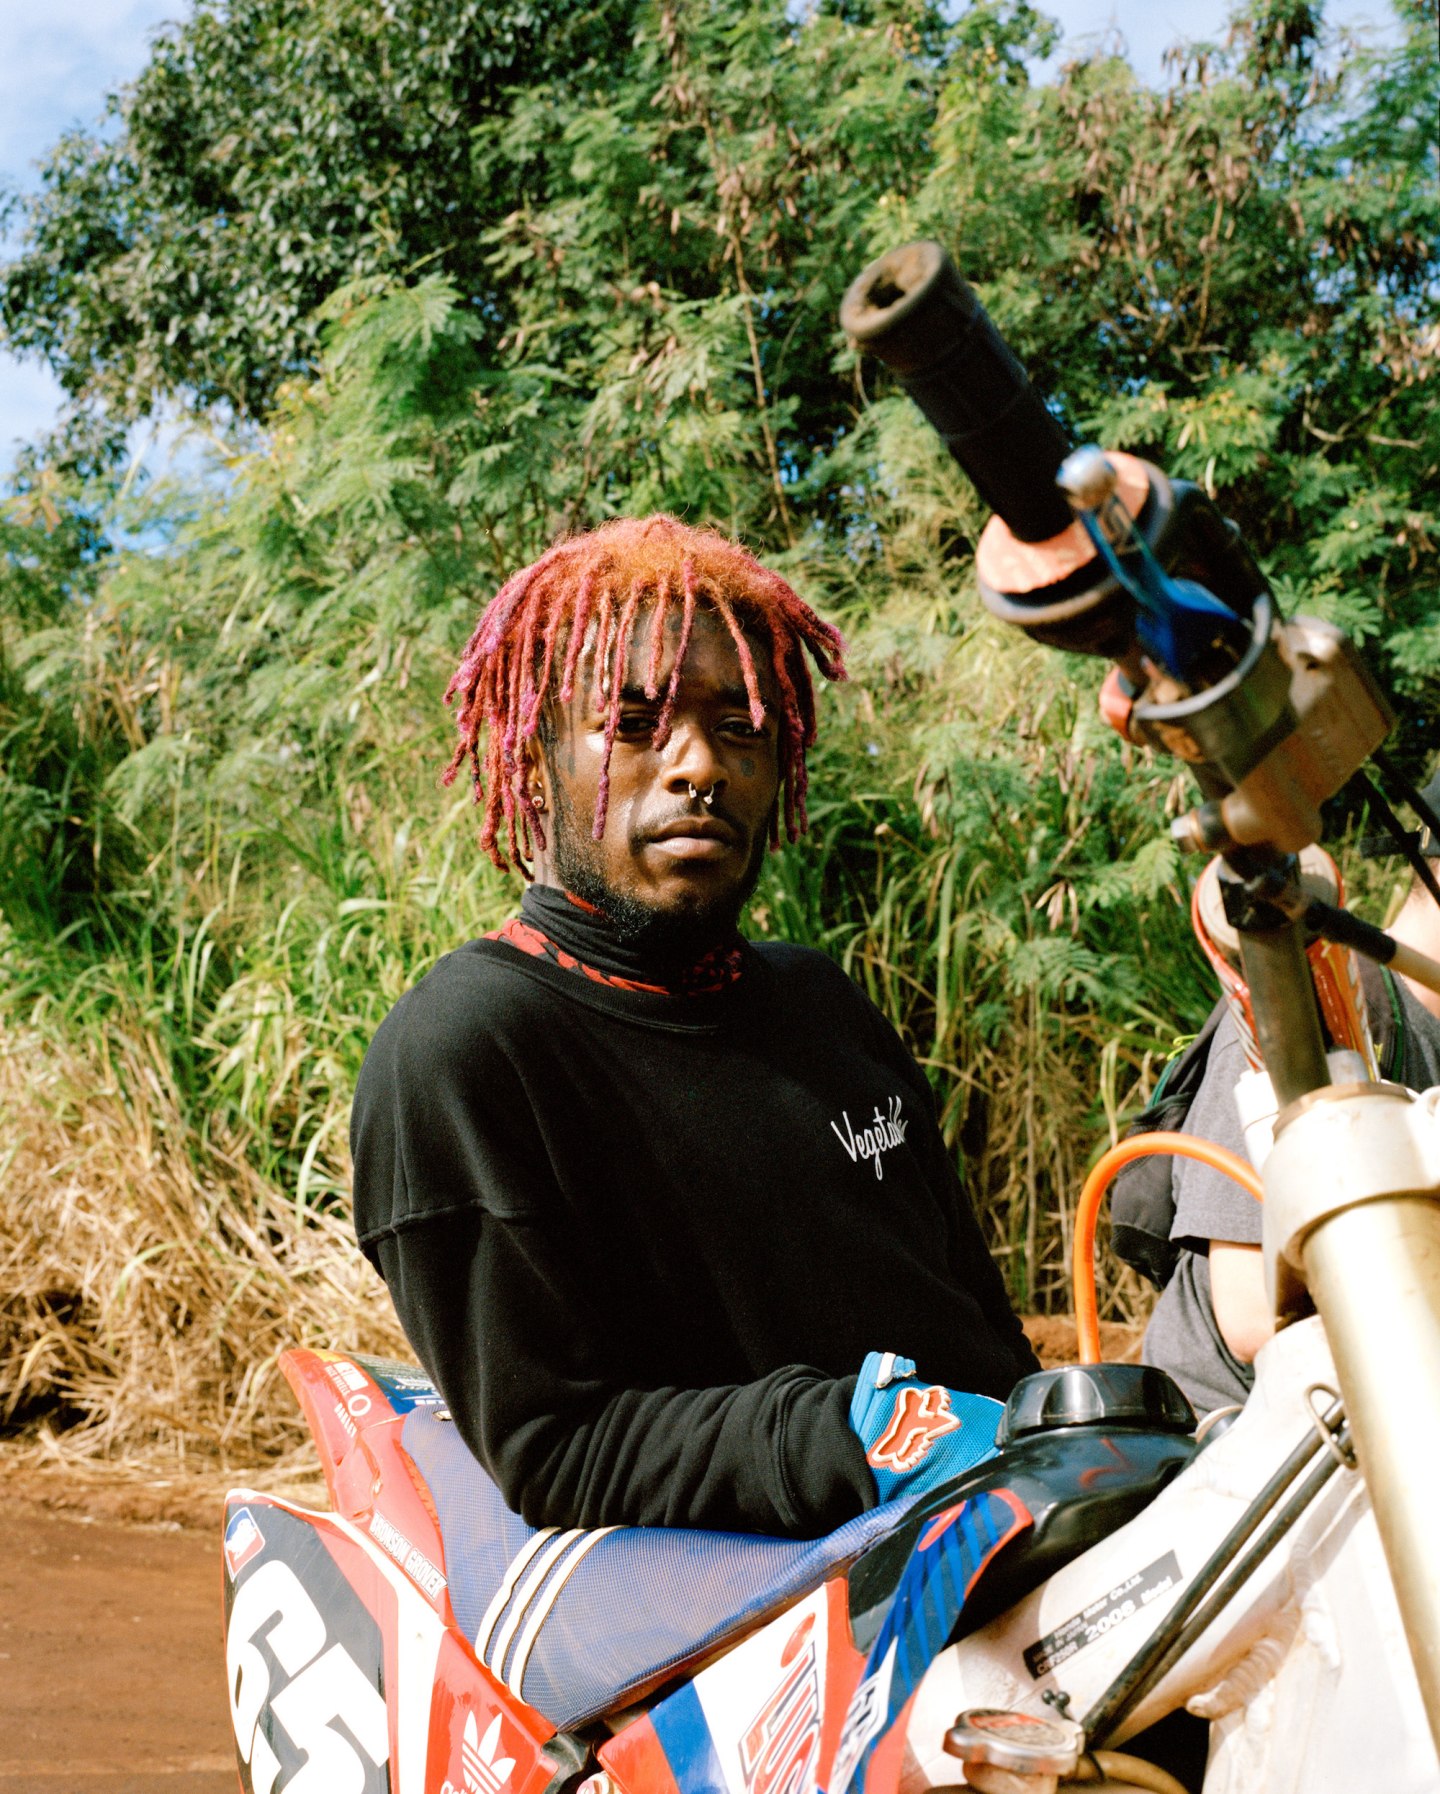 Lil Uzi Vert Can’t Be Bothered